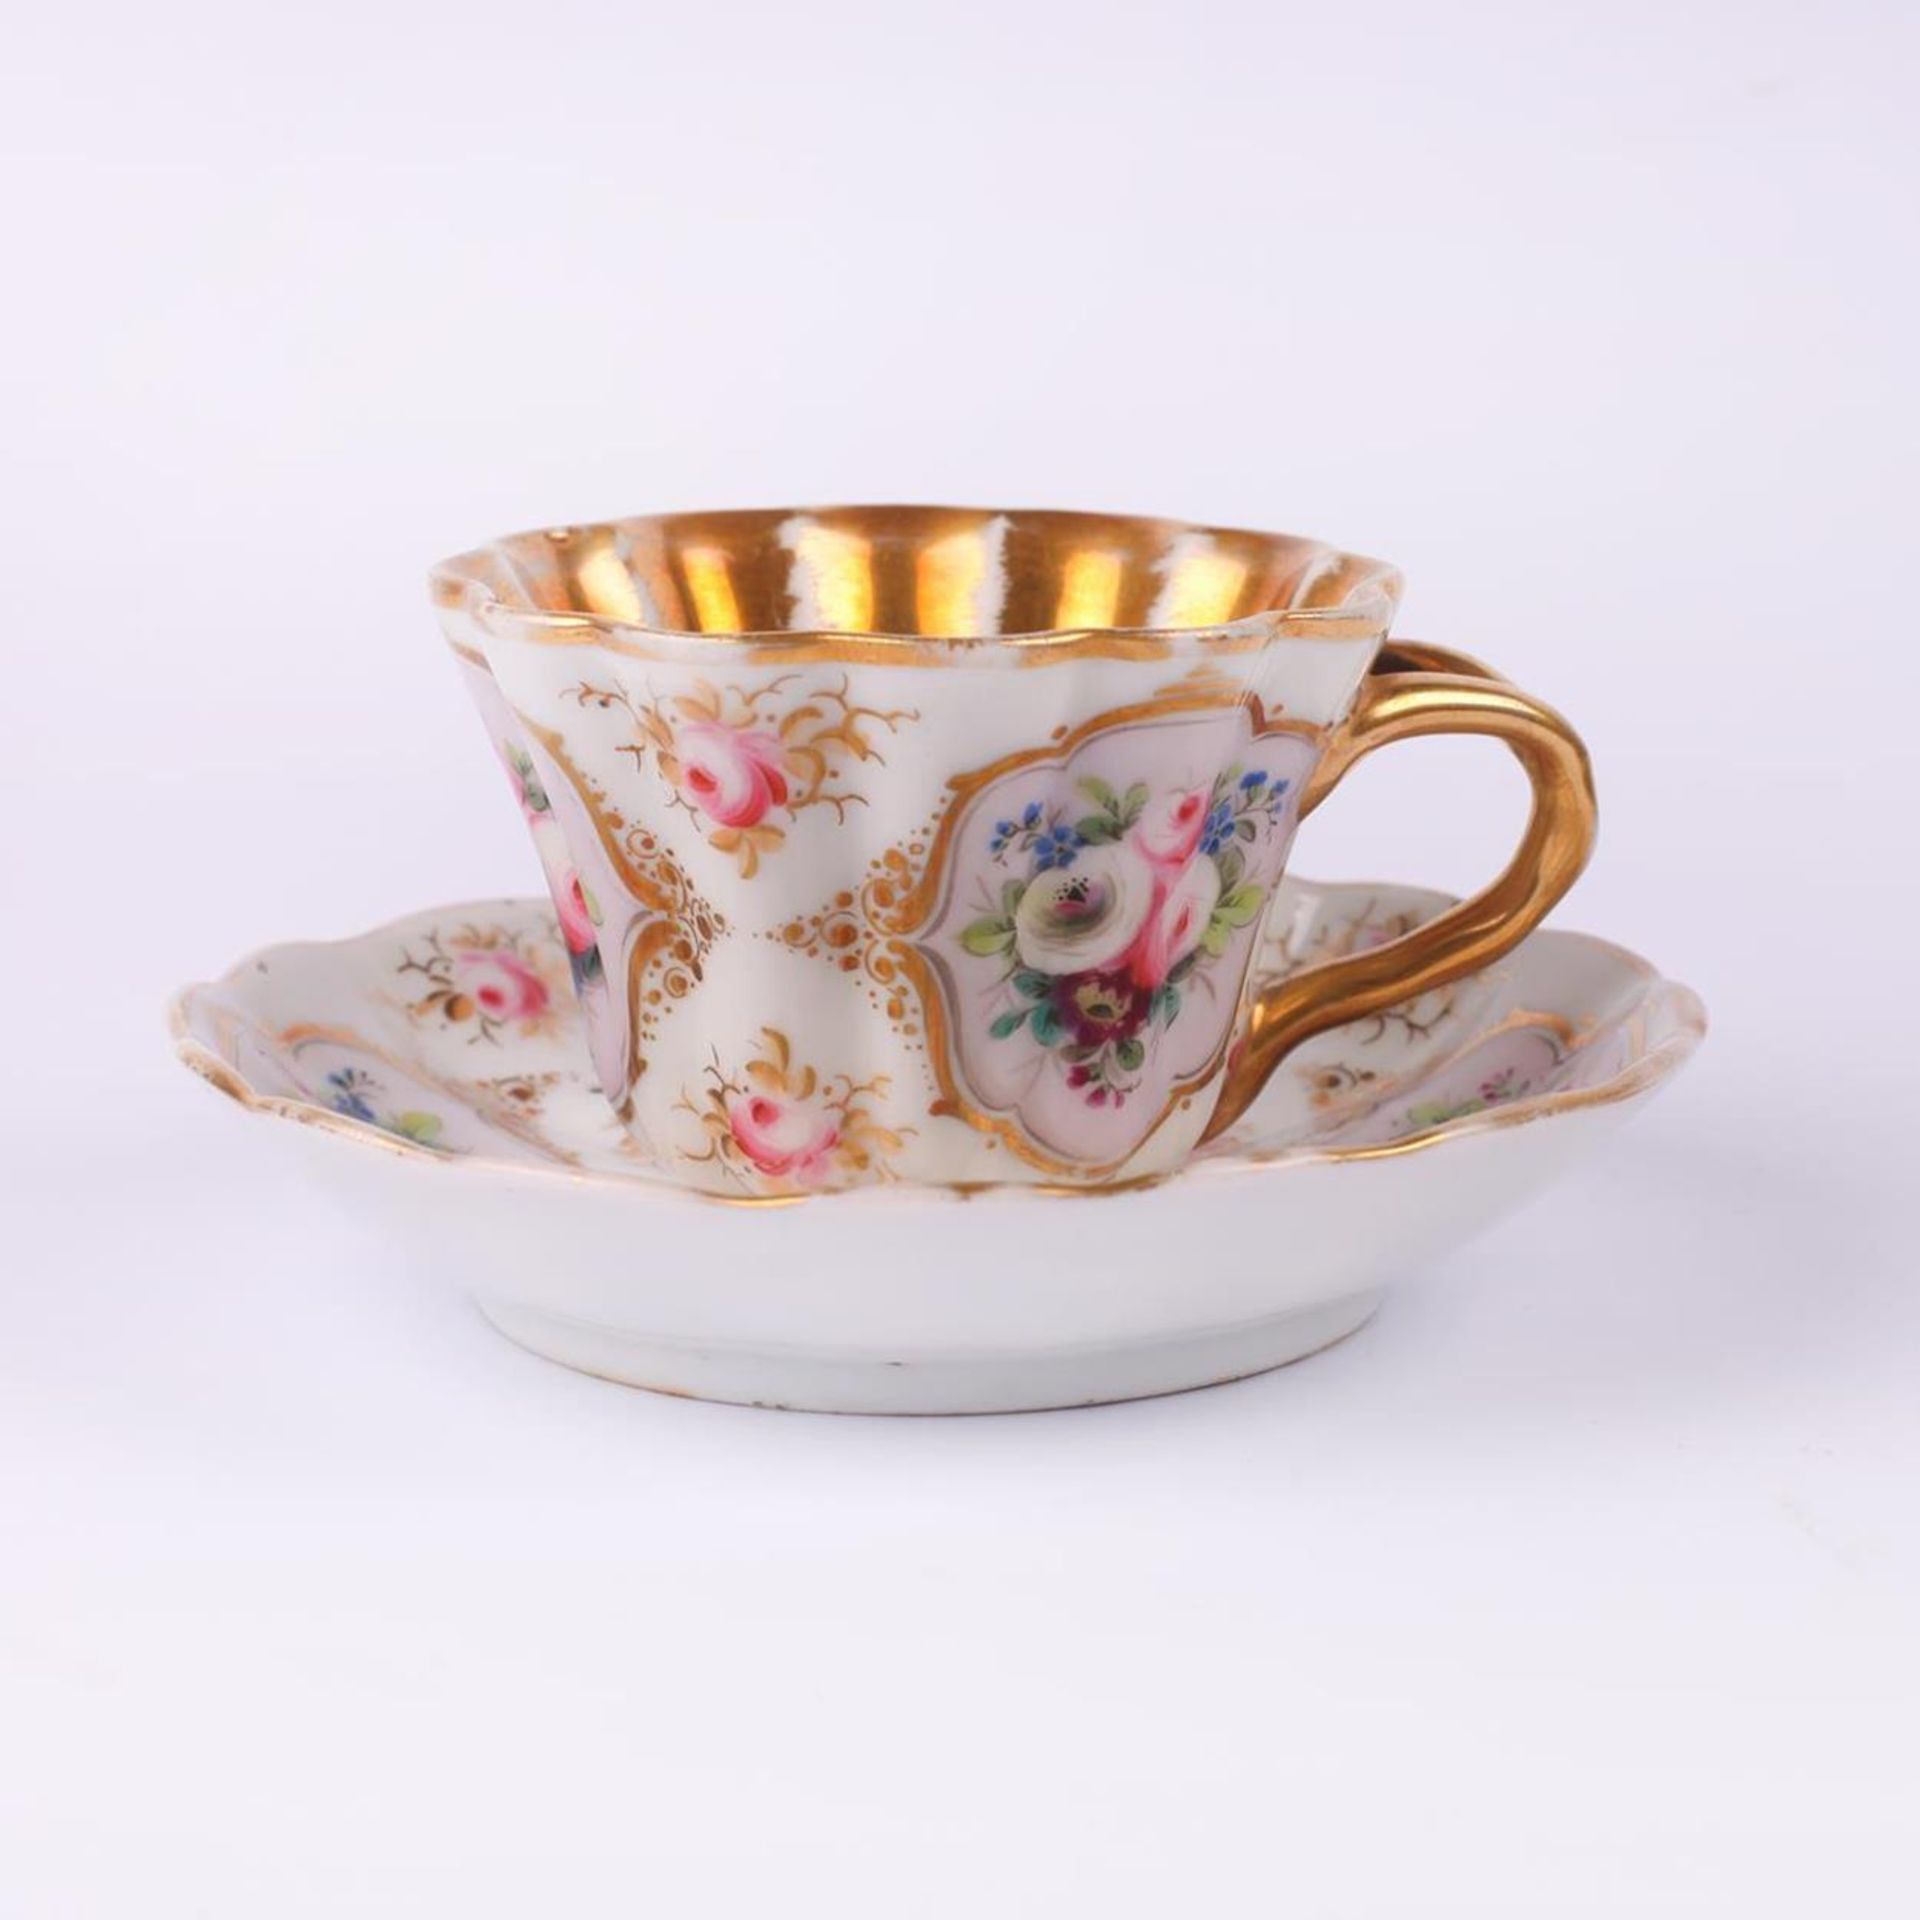 Tea cup and saucer set with flower painting. Kudinov Porceline Factory (?). Russia. 1820s.